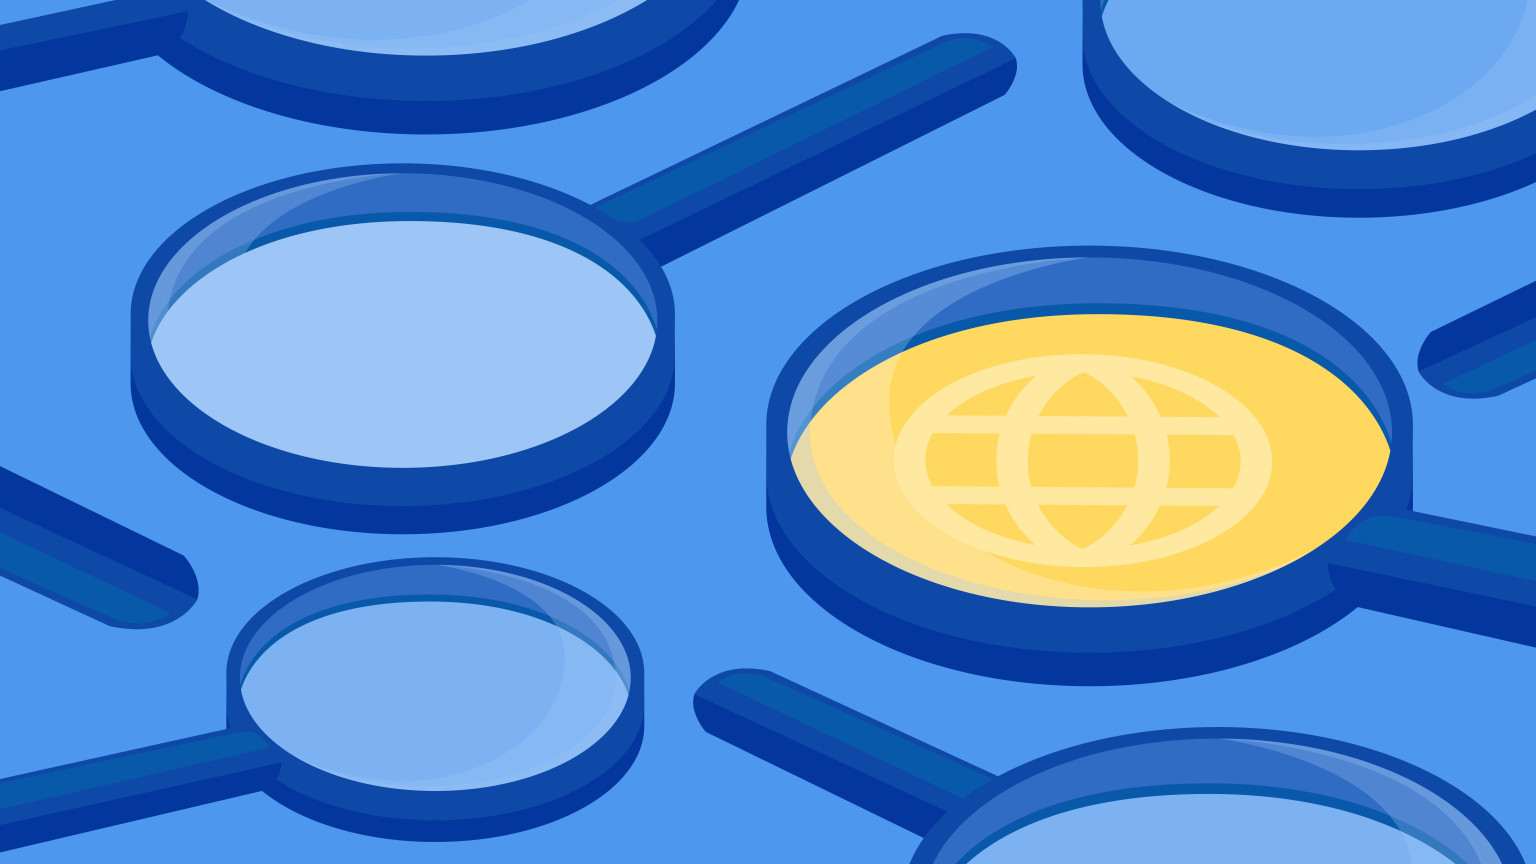 Illustration of magnifying glasses, with one being yellow with the worldwideweb logo inside it, representing SEO practices that make it easy to be found.